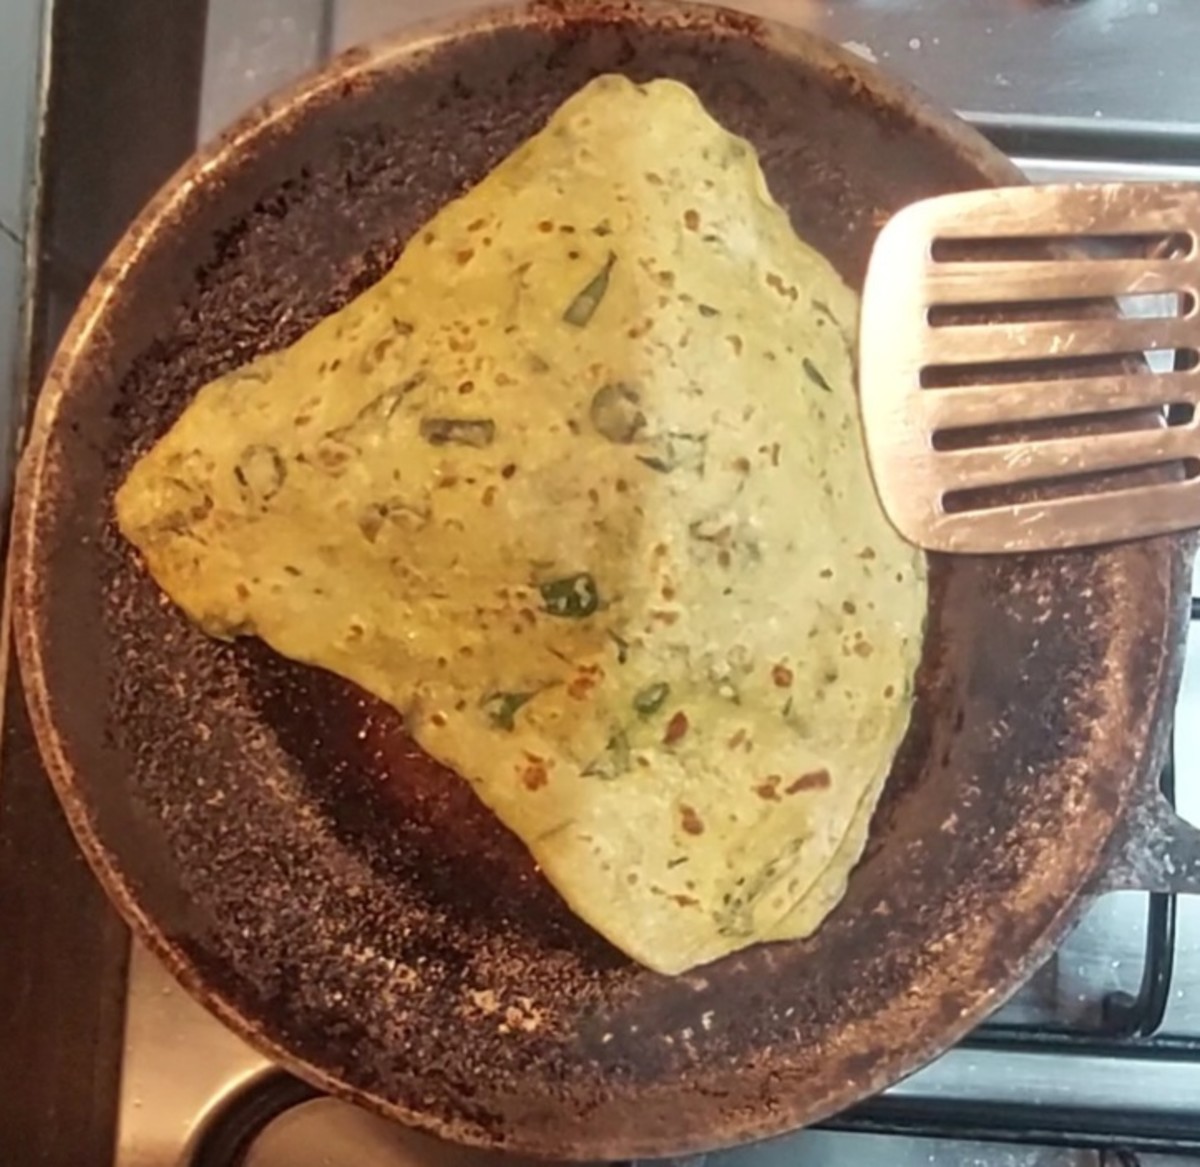 Heat a frying pan over medium flame and add a few drops of ghee. Dust off excess flour from the first thepla and fry it. Drizzle a few drops of ghee over the thepla, flip and cook on both sides till brown spots appear. Transfer to a plate.